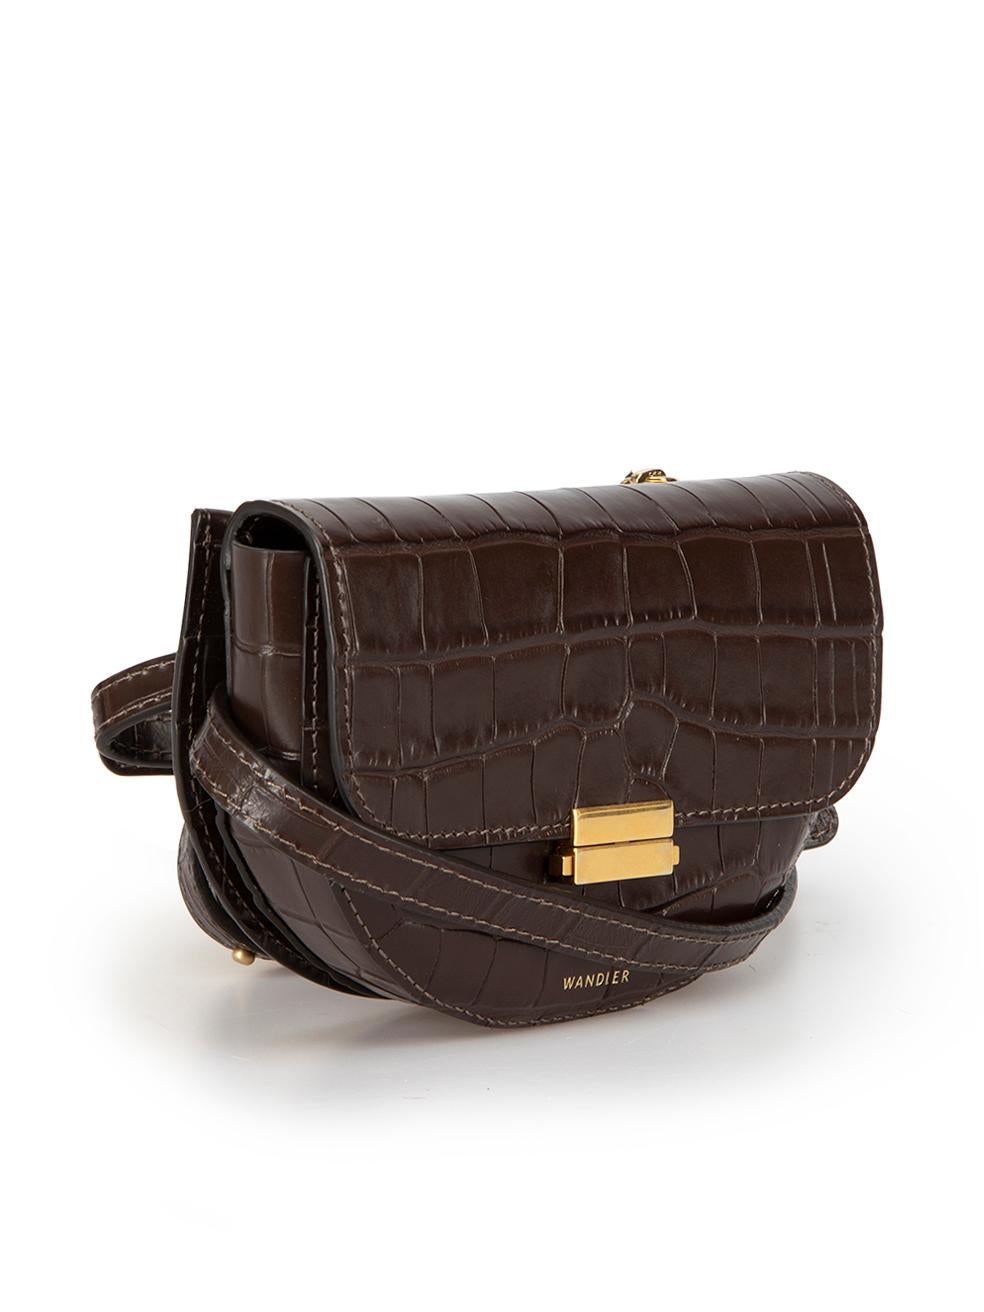 CONDITION is Very good. Minimal wear to bag is evident. Minimal wear to the hardware with very minimal tarnishing to the fastening on this used Wandler designer resale item. 
 
 Details
 Brown
 Leather
 Croc embossed pattern
 Mini belt bag
 1x